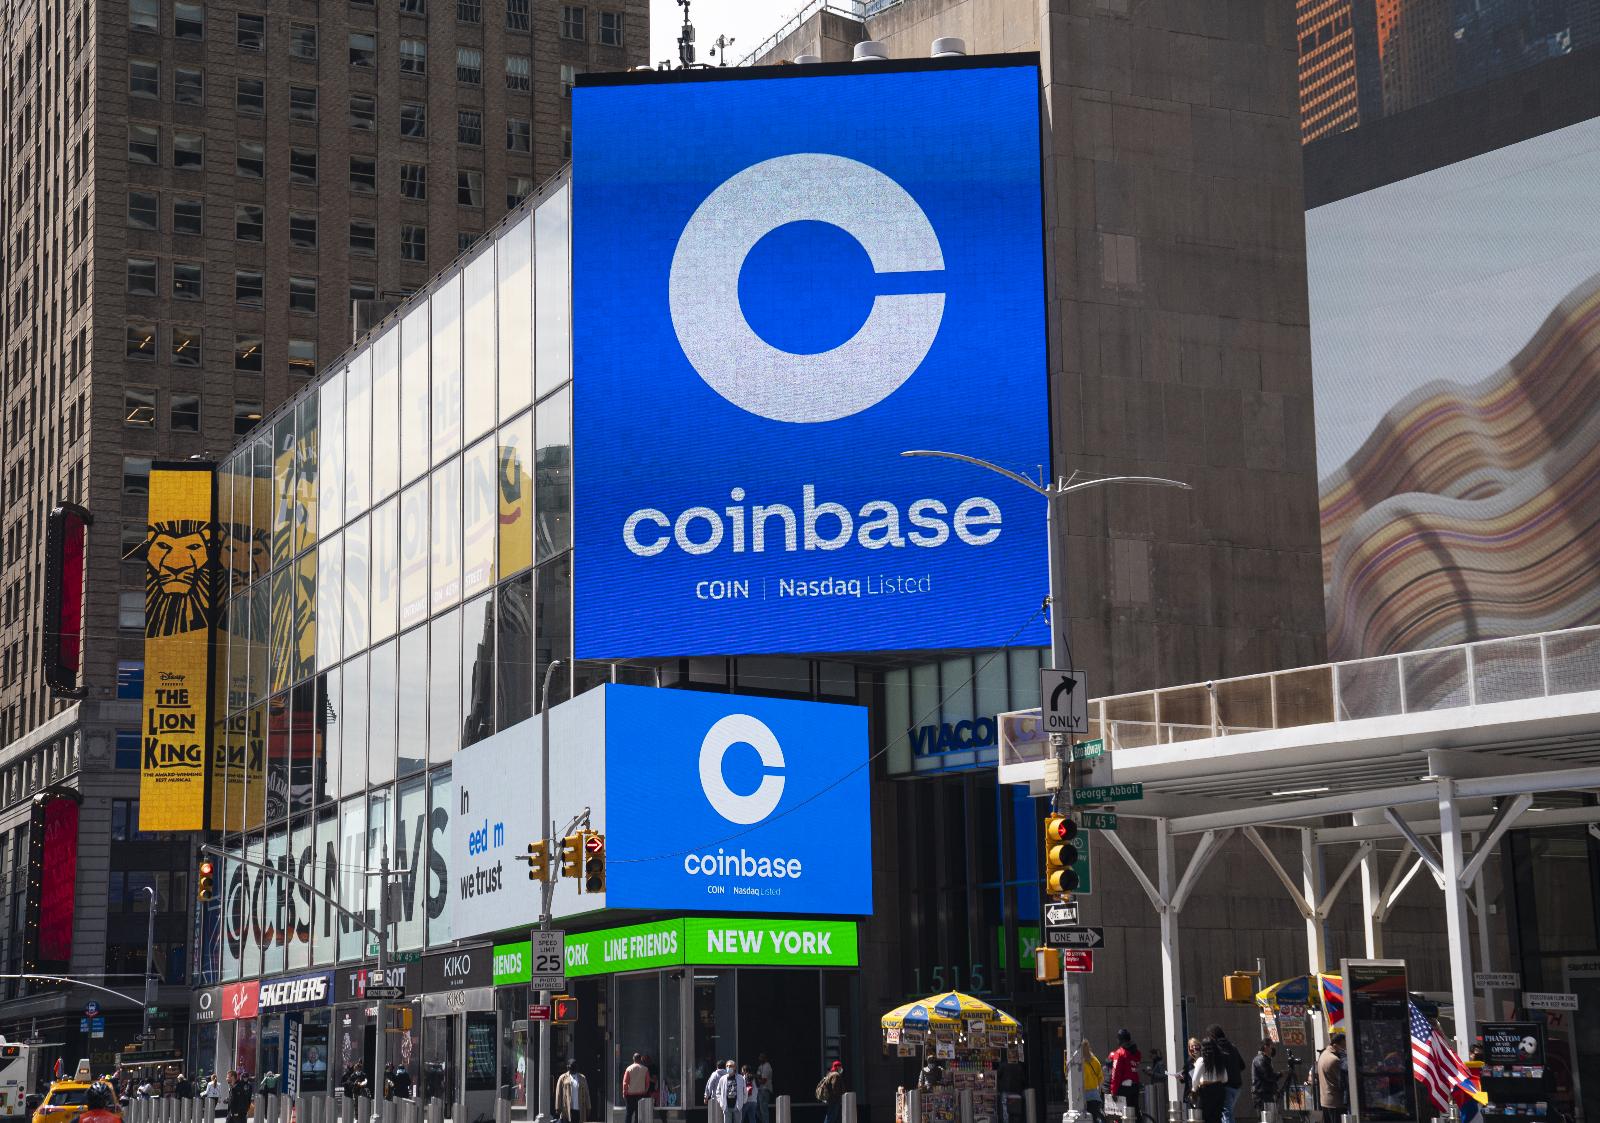 Coinbase says some employees’ information stolen by hackers